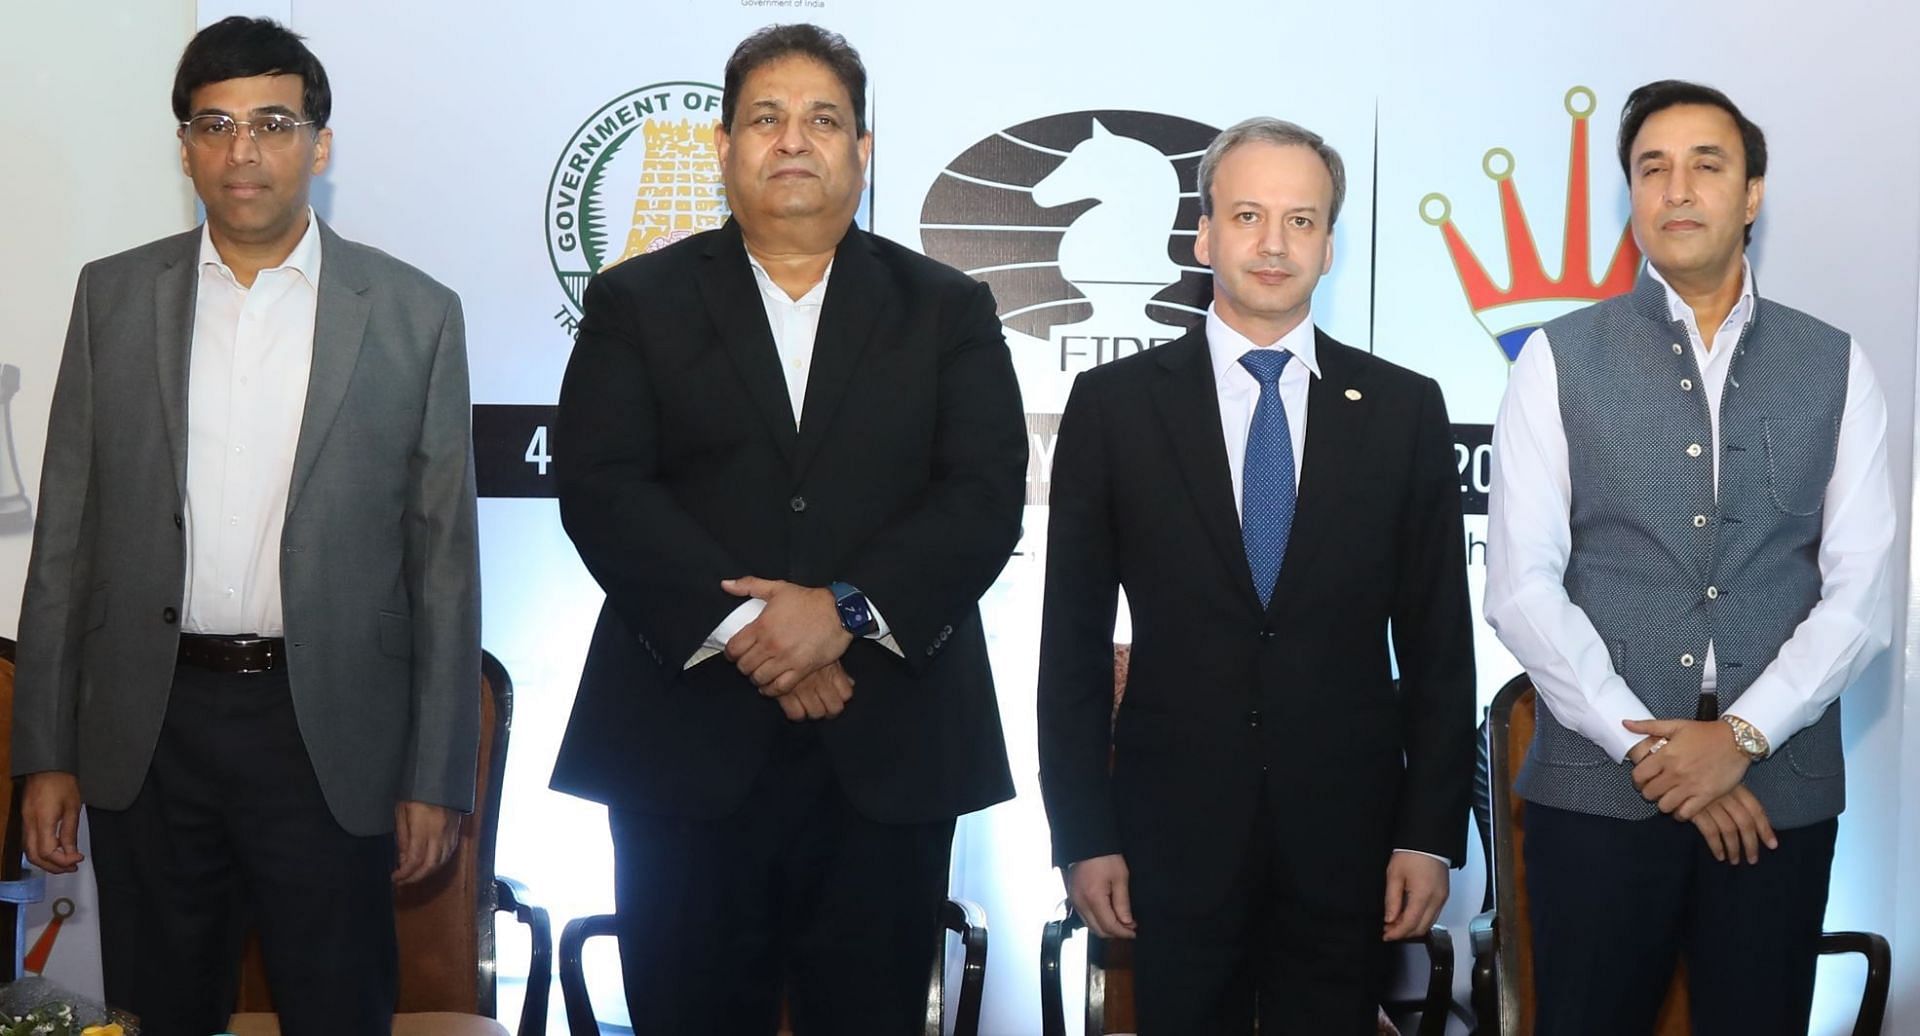 Five-time World Champion Viswanathan Anand (L) with AICF president Sanjay Kapoor (R) and other AICF officials (Pic credit: AICF)